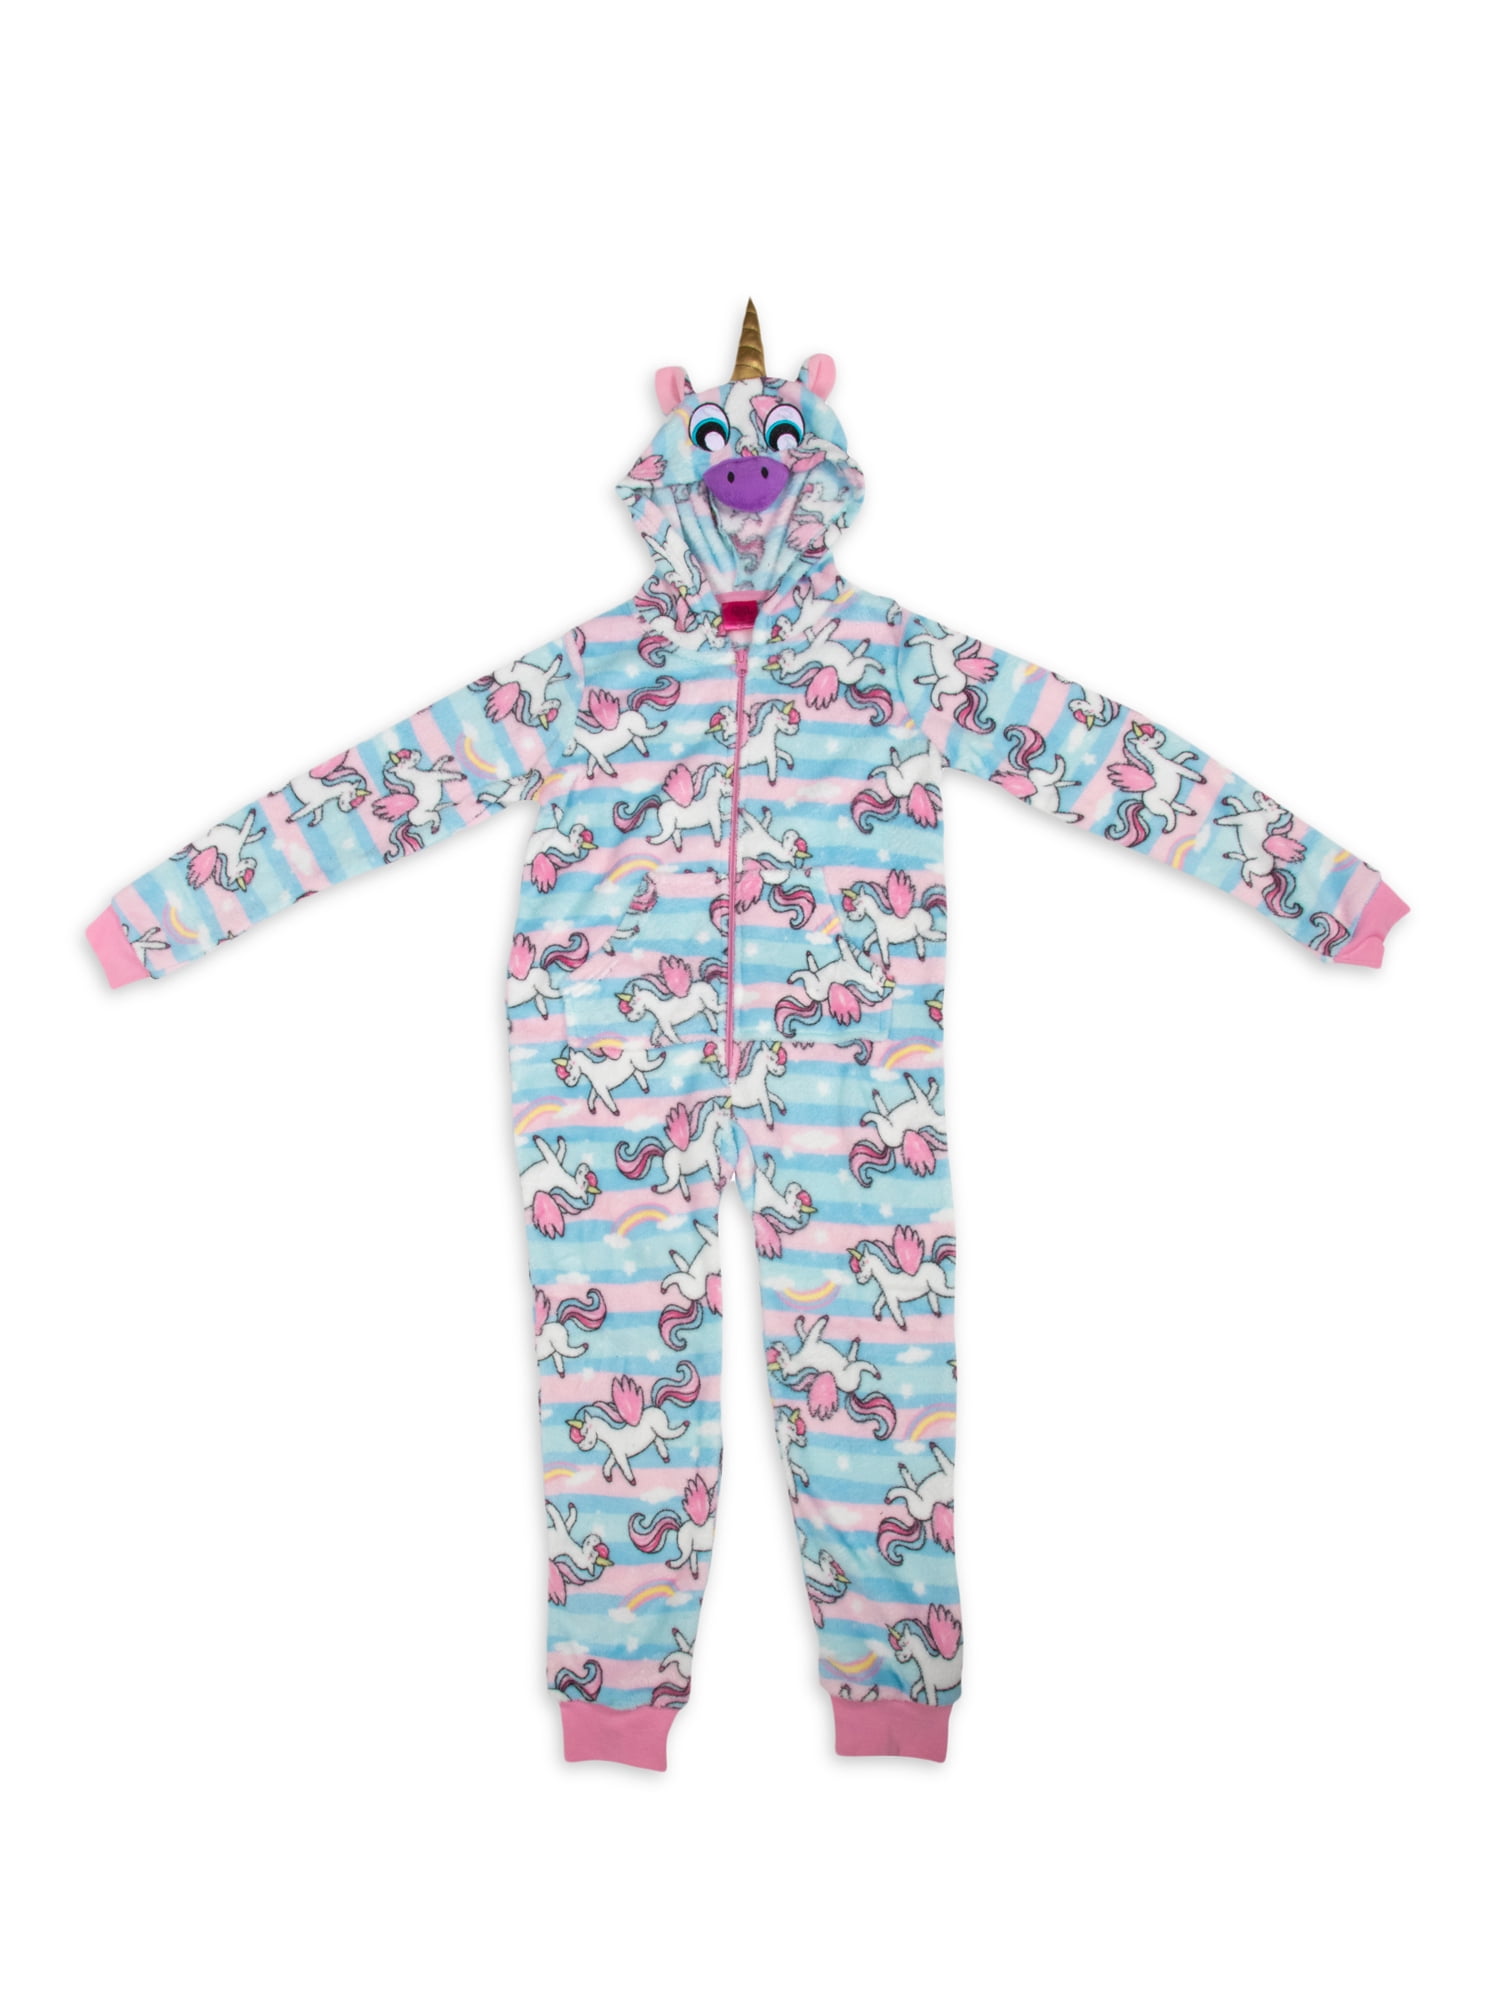 Chili Peppers Girls Coral Fleece Critter Onesie Pajamas, Sizes 4-7 ...